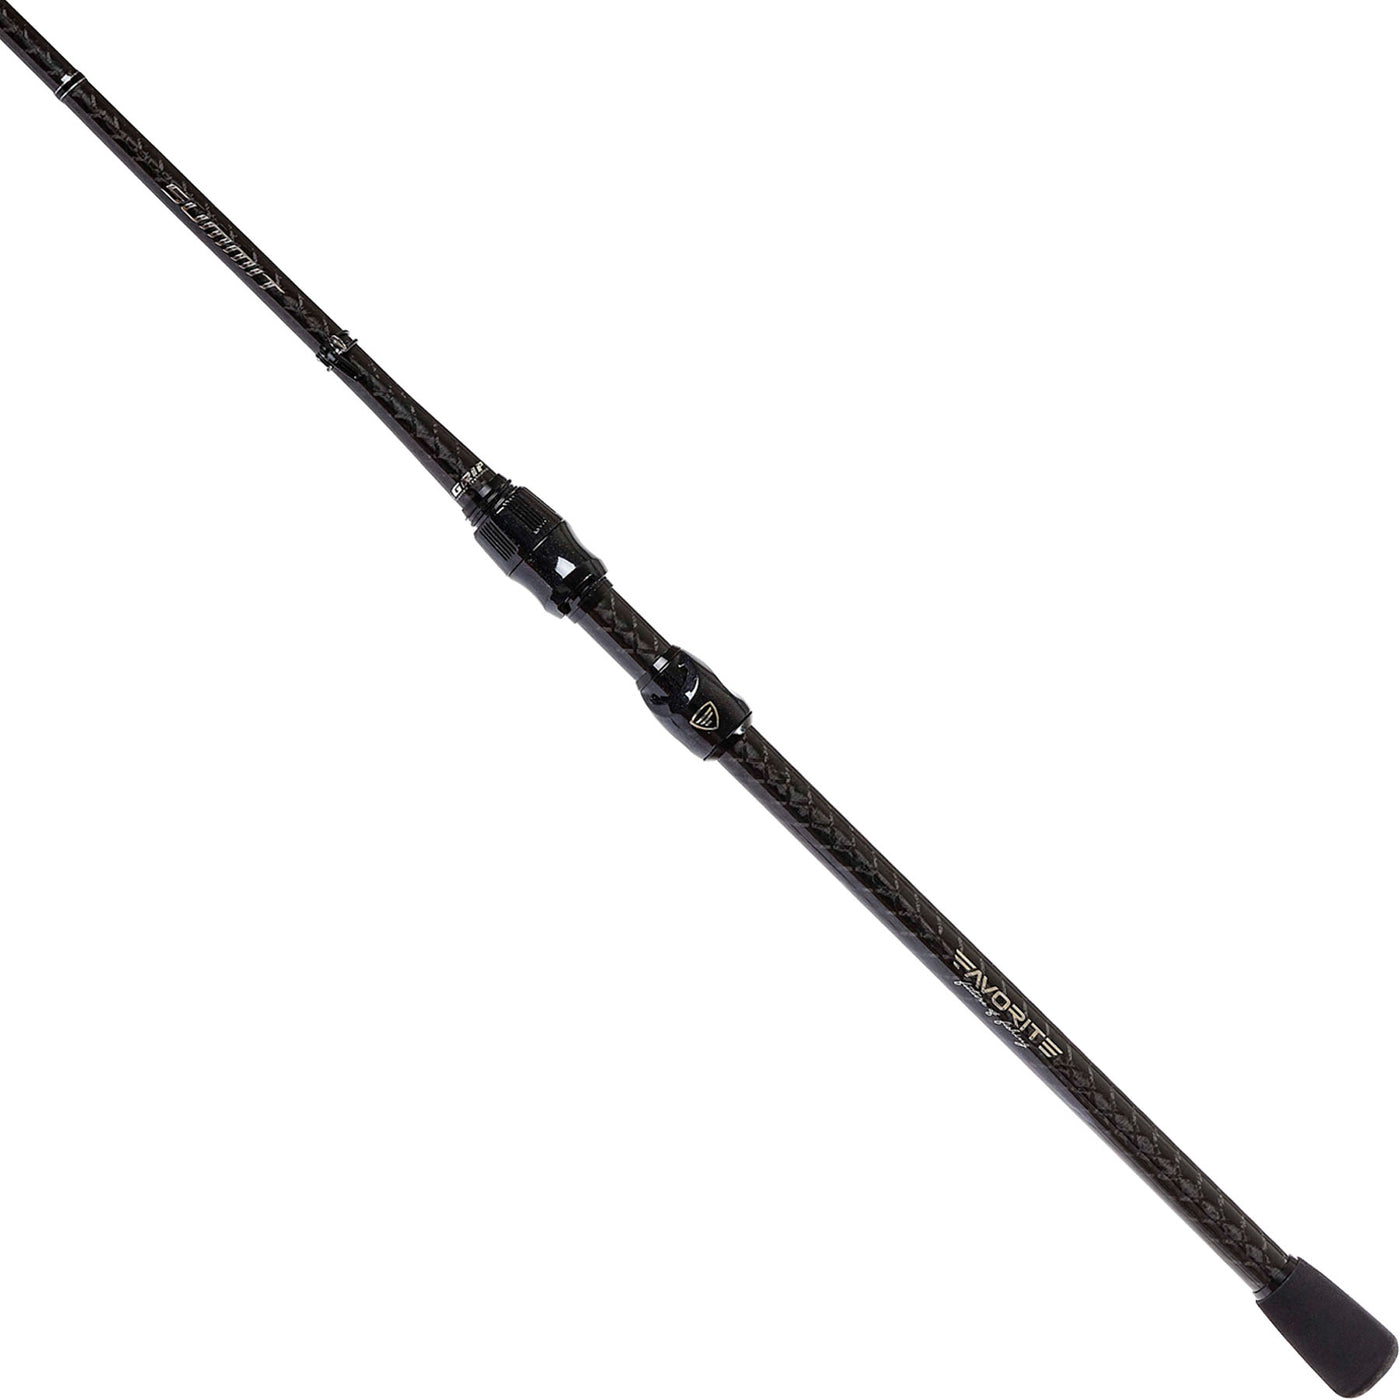 Best 2 Piece Casting Rod In 2020 – Reviews Of Top Most Products